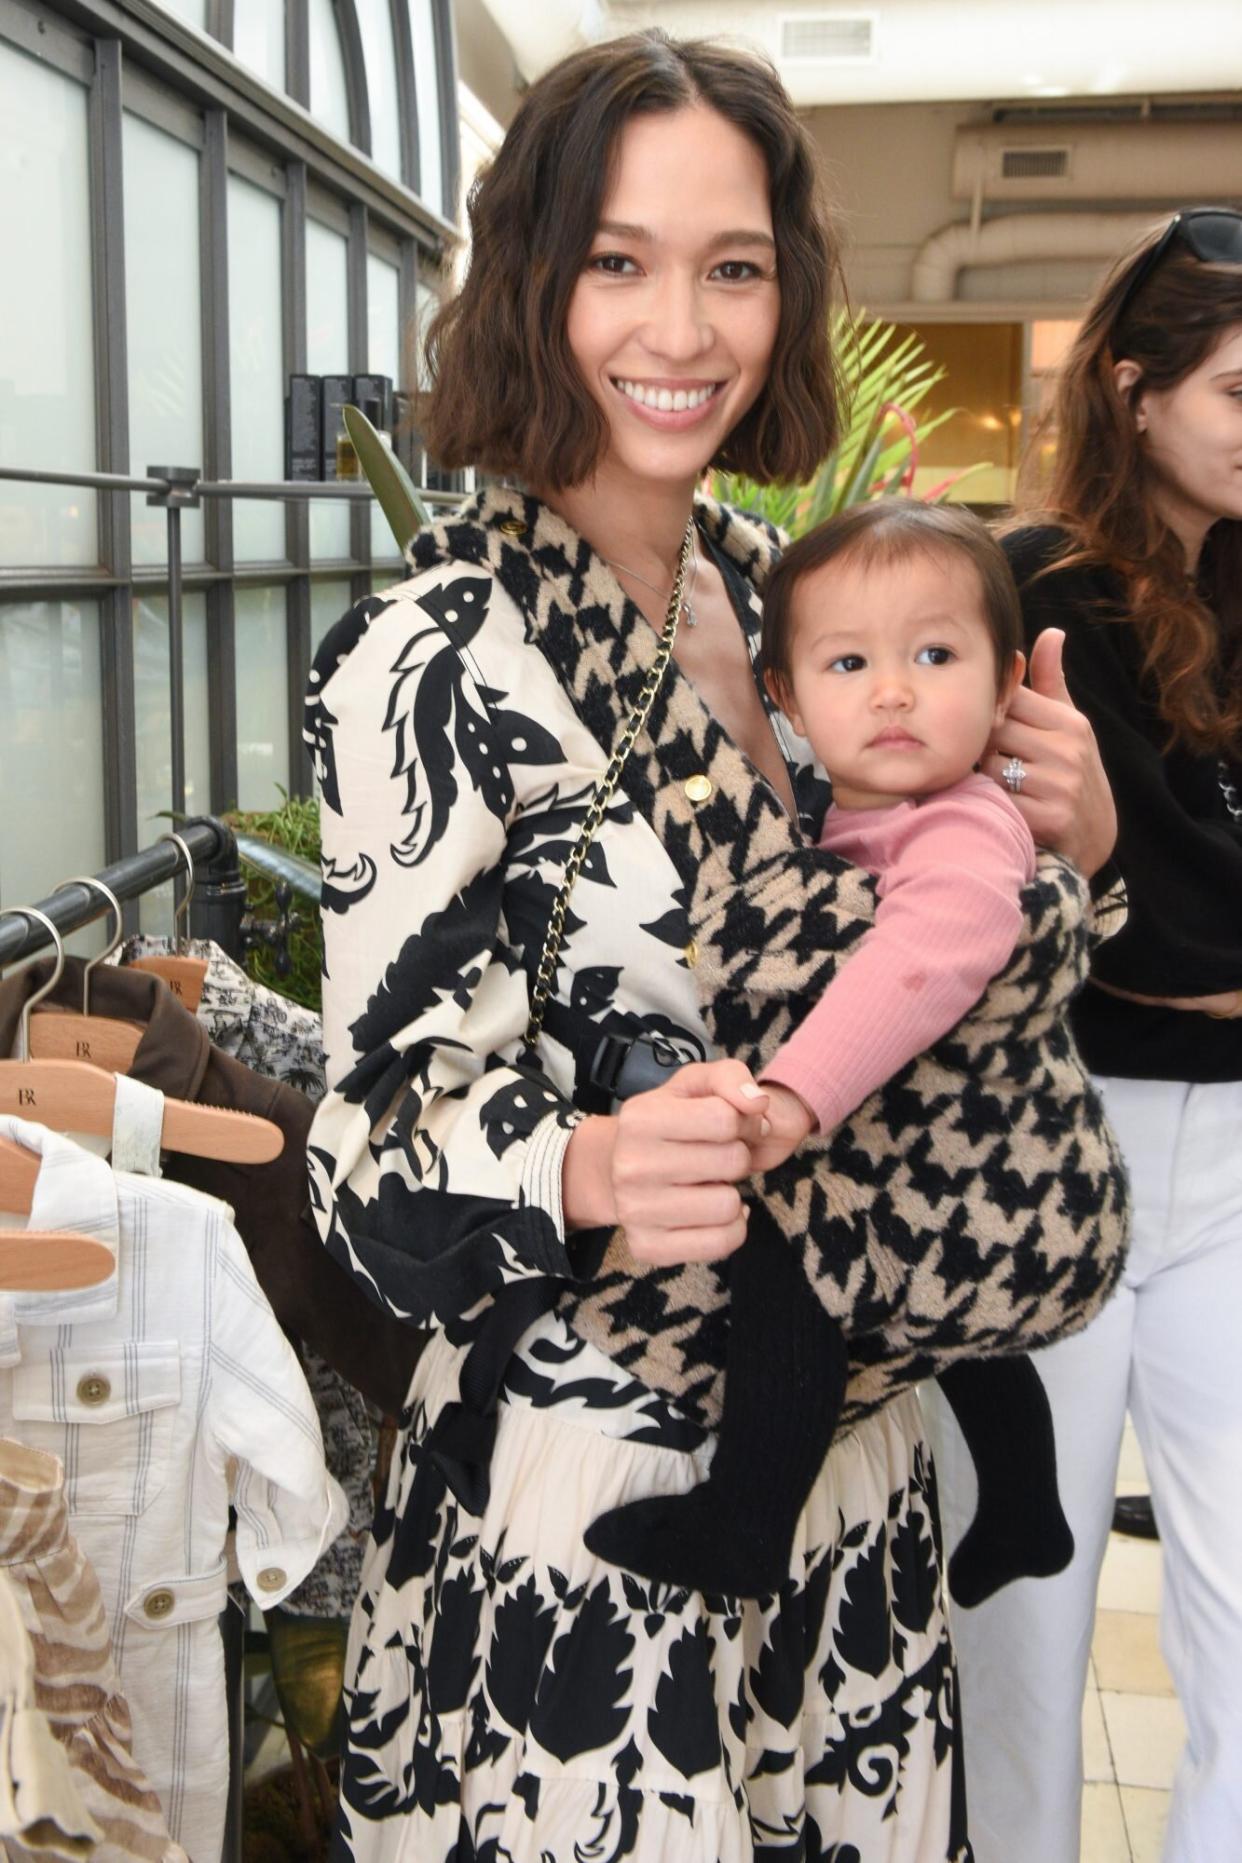 LOS ANGELES, CALIFORNIA - MARCH 06: Liv Lo Golding and Lyla Golding attend as goop hosts a celebration for the launch of Banana Republic Baby on March 06, 2022 in Los Angeles, California. (Photo by Vivien Killilea/Getty Images for goop)